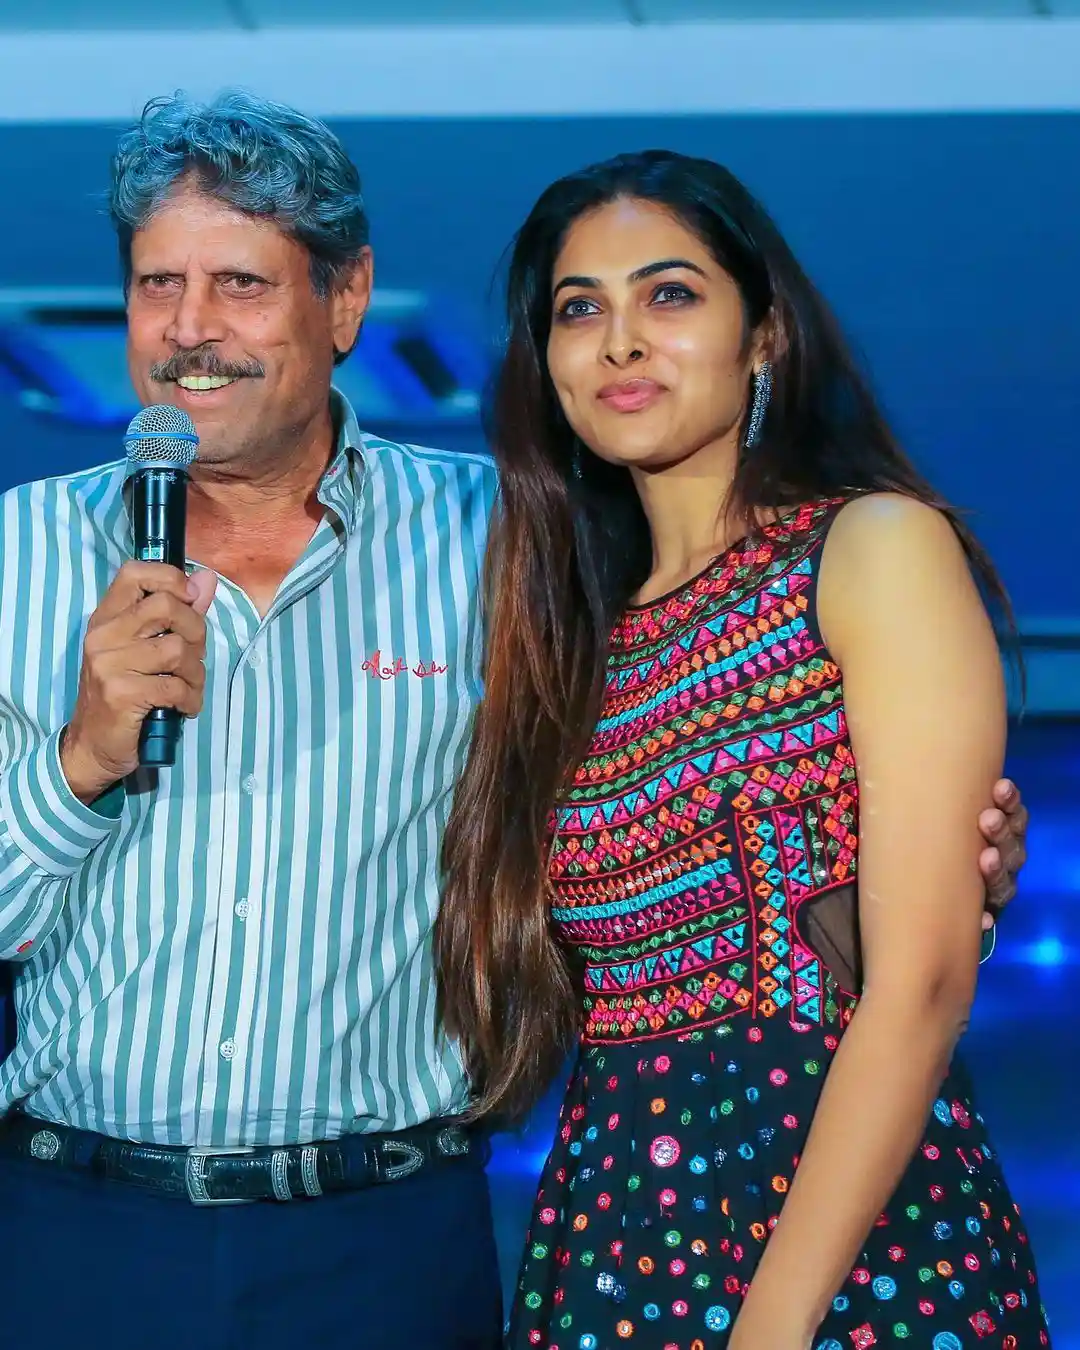 Divi Vadthya with Kapil Dev in Rotary Premier League